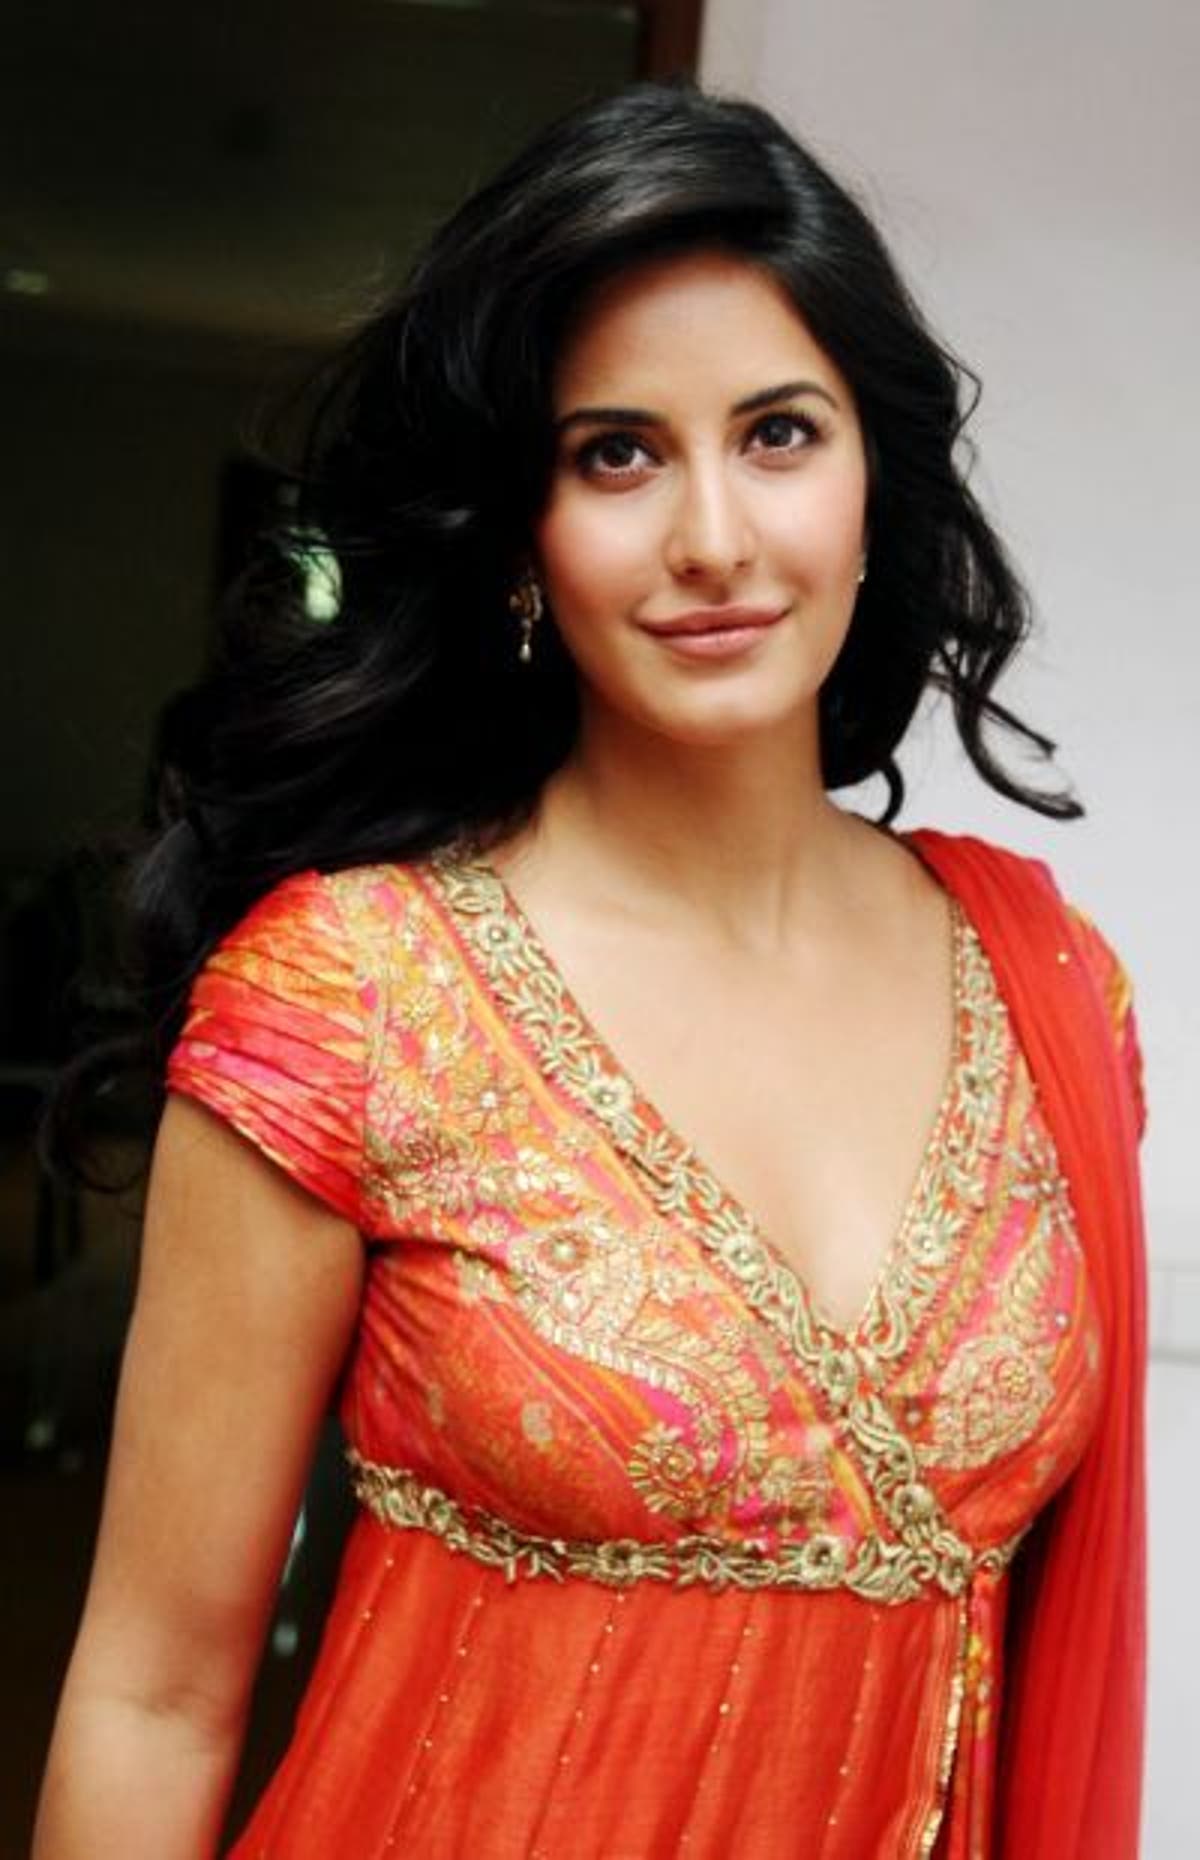 Katrina Kaif Bf Sex - Bollywood star Kaif takes success in her stride | The Independent | The  Independent